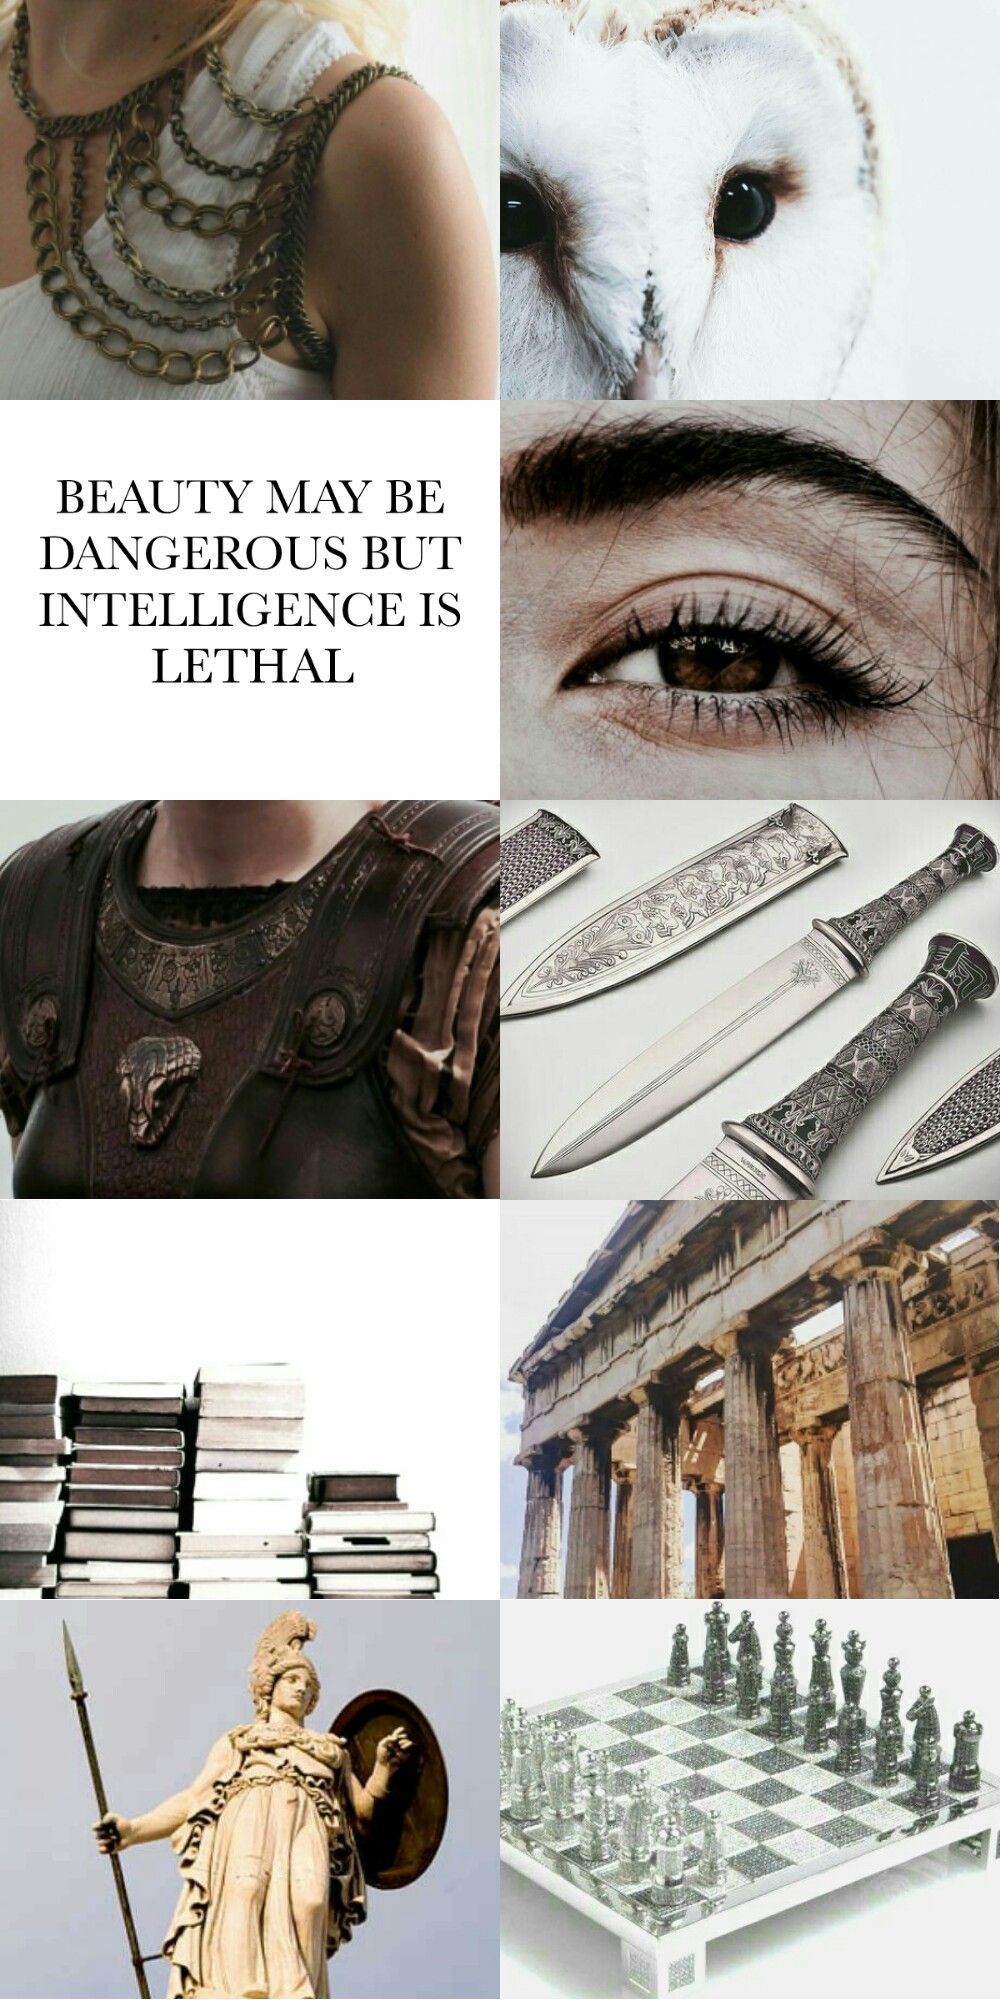 Aesthetic for Athena, goddess of wisdom, intelligence, and strategy. Athena is also known for her wisdom, courage, and strength. She is often depicted wearing a helmet and carrying a shield. Her symbols include the owl, the olive tree, and the aegis. - Artemis